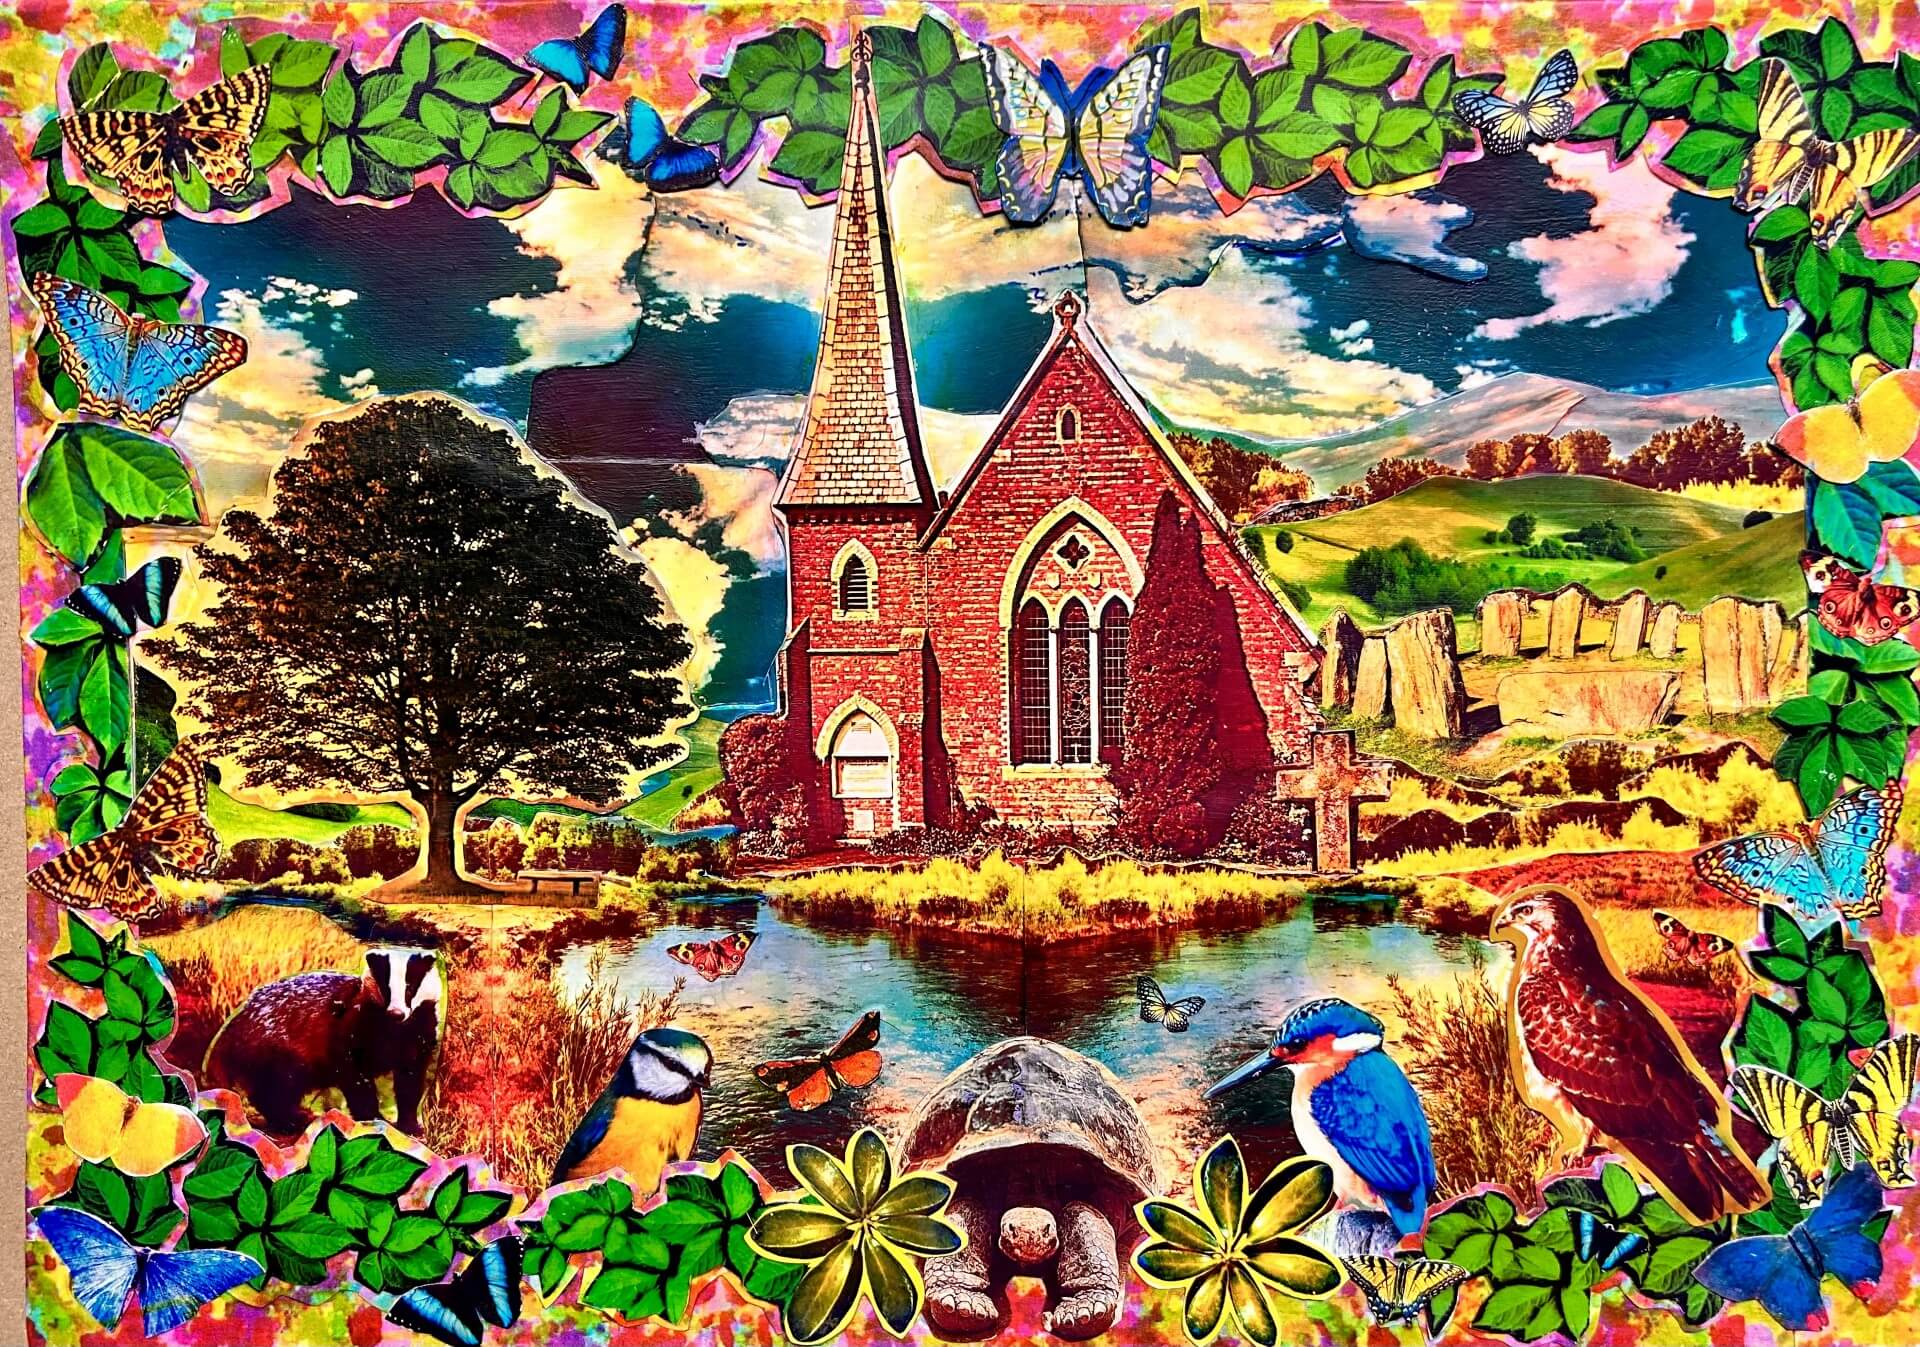 "Country Church and stone circle commission" by Emma Mullender